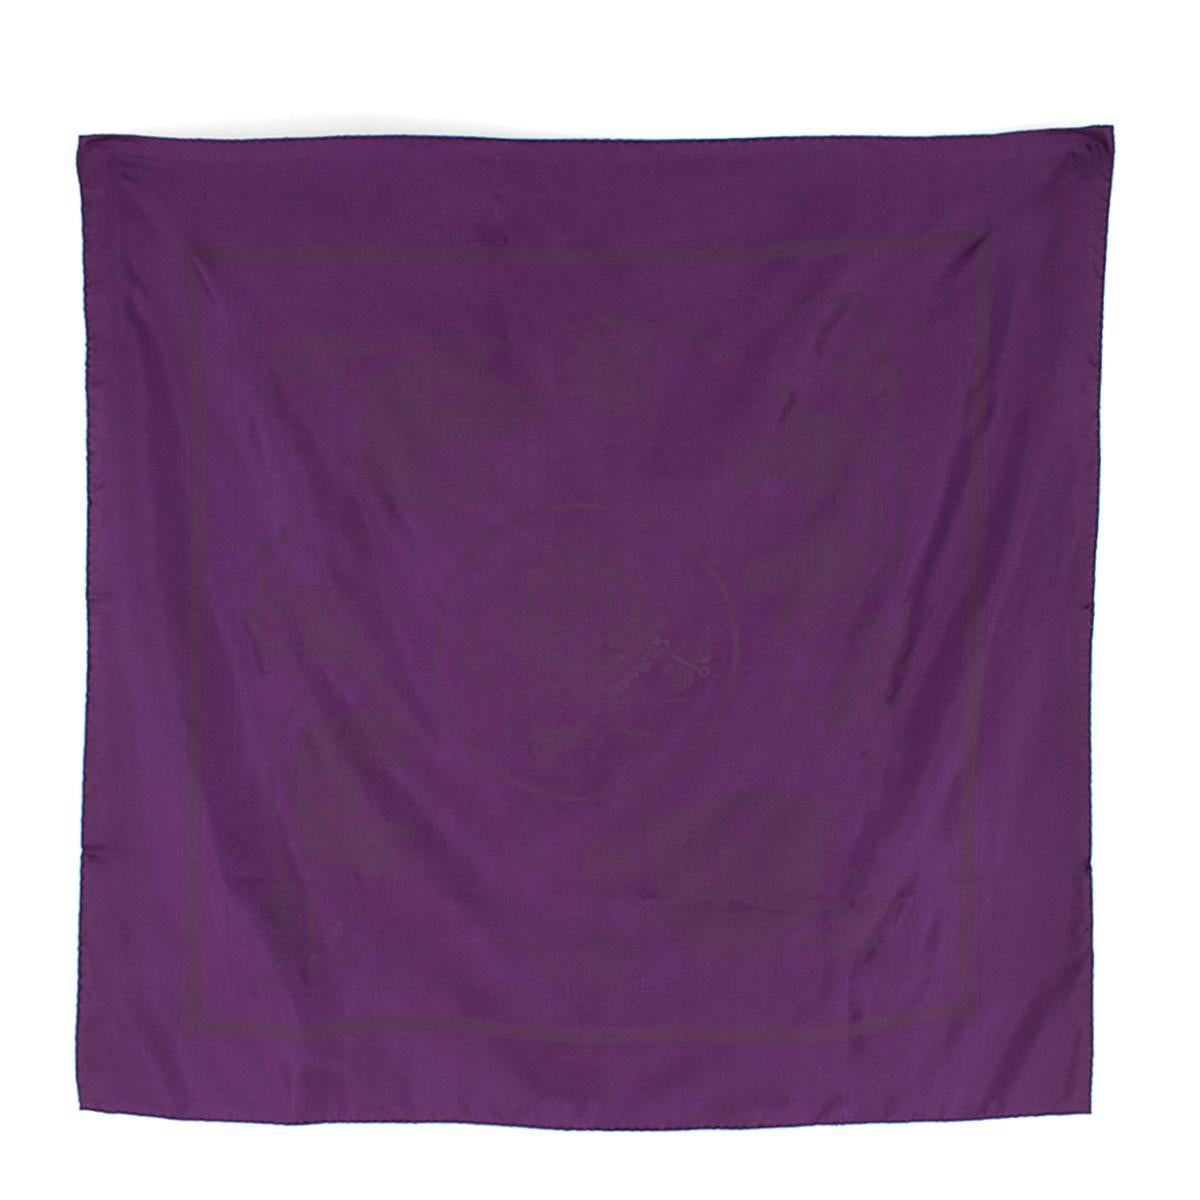 Hermes Ex Libris Monochrome Silk Scarf

- Purple, lightweight, Ex Libris Monochrome scarf
- 100% silk
- Hand stitched rolled edges
- This item comes with the original box.

Please note, these items are pre-owned and may show some signs of storage,